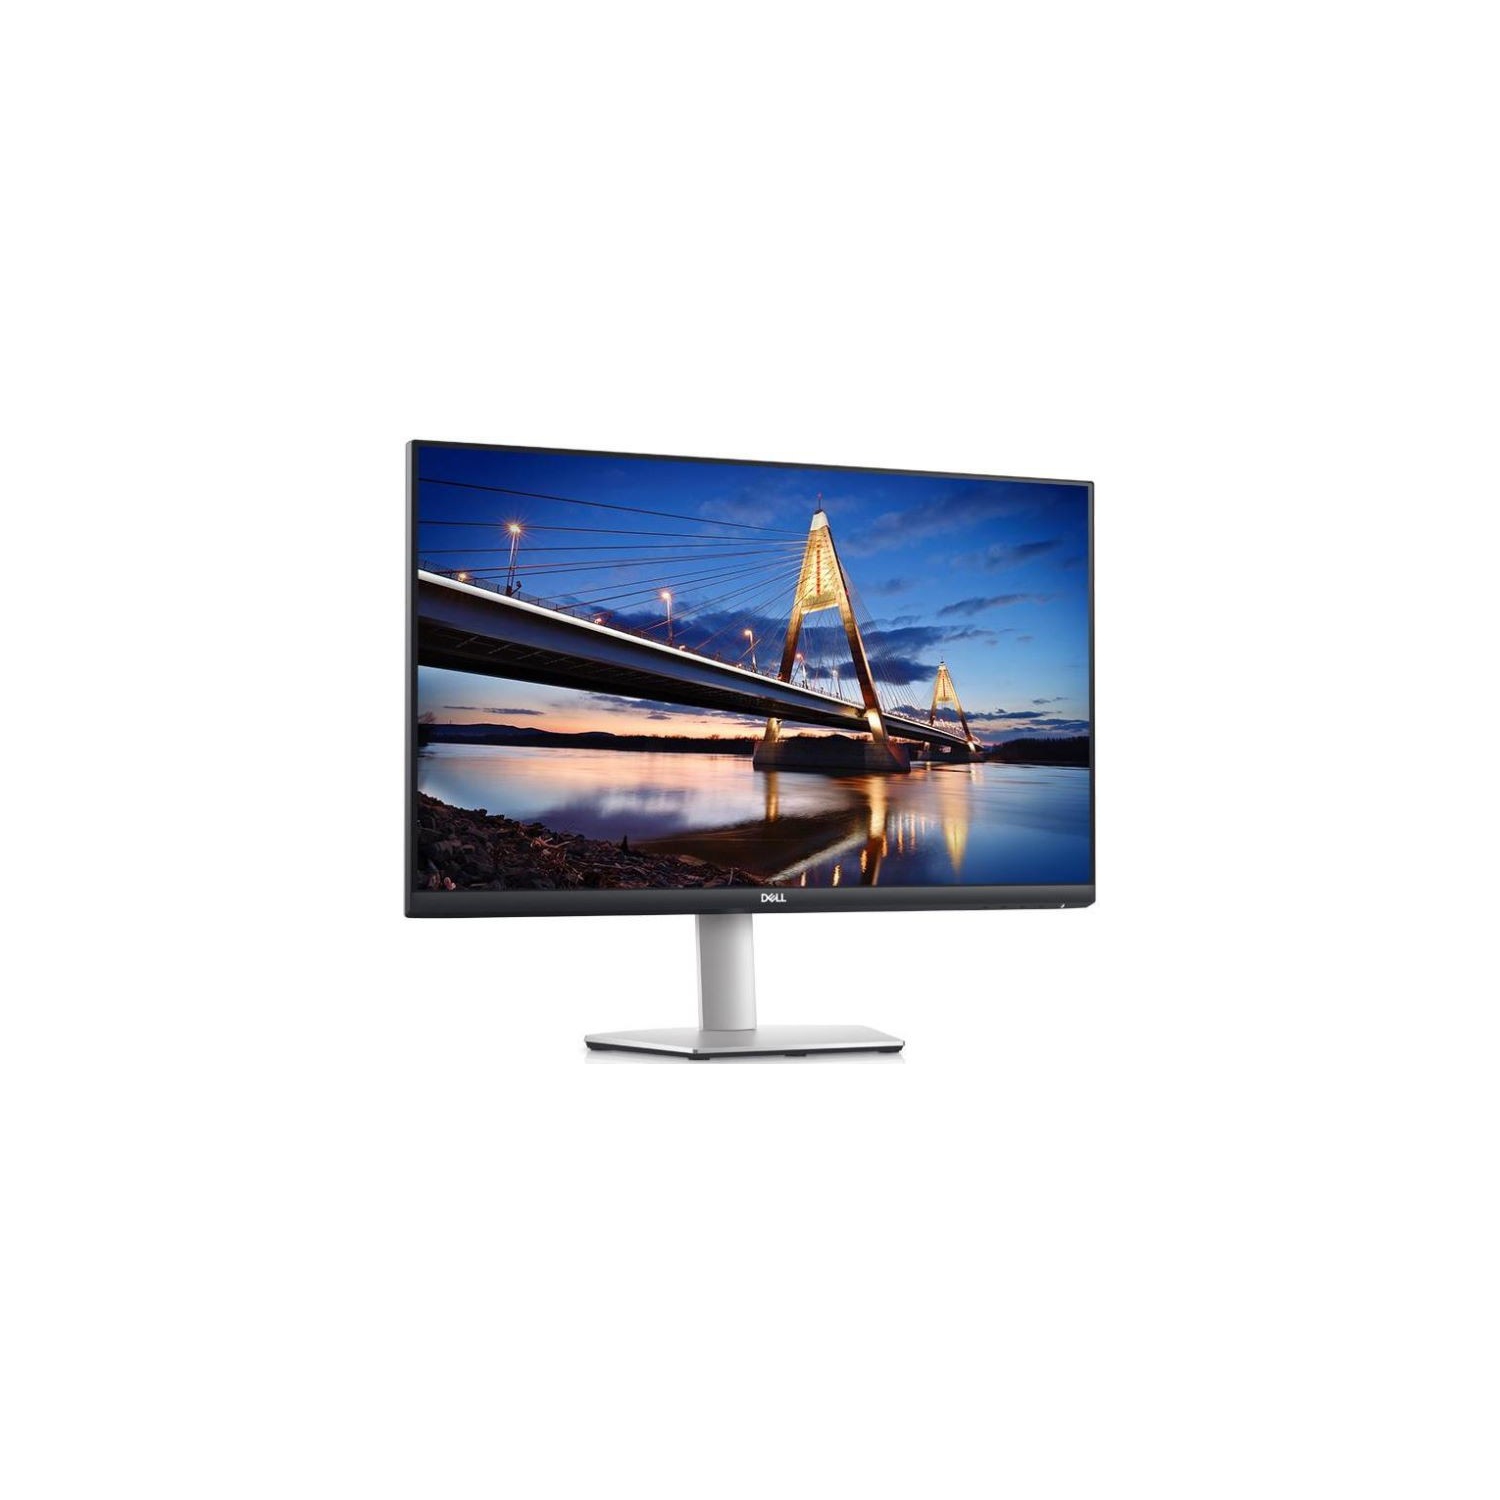 Refurbished (Excellent) - DELL S2721DS AMD FreeSync 27" QHD Gaming Monitor - 2560x1440 - 75Hz, 2X HDMI, DisplayPort, IPS - Certified Refurbished